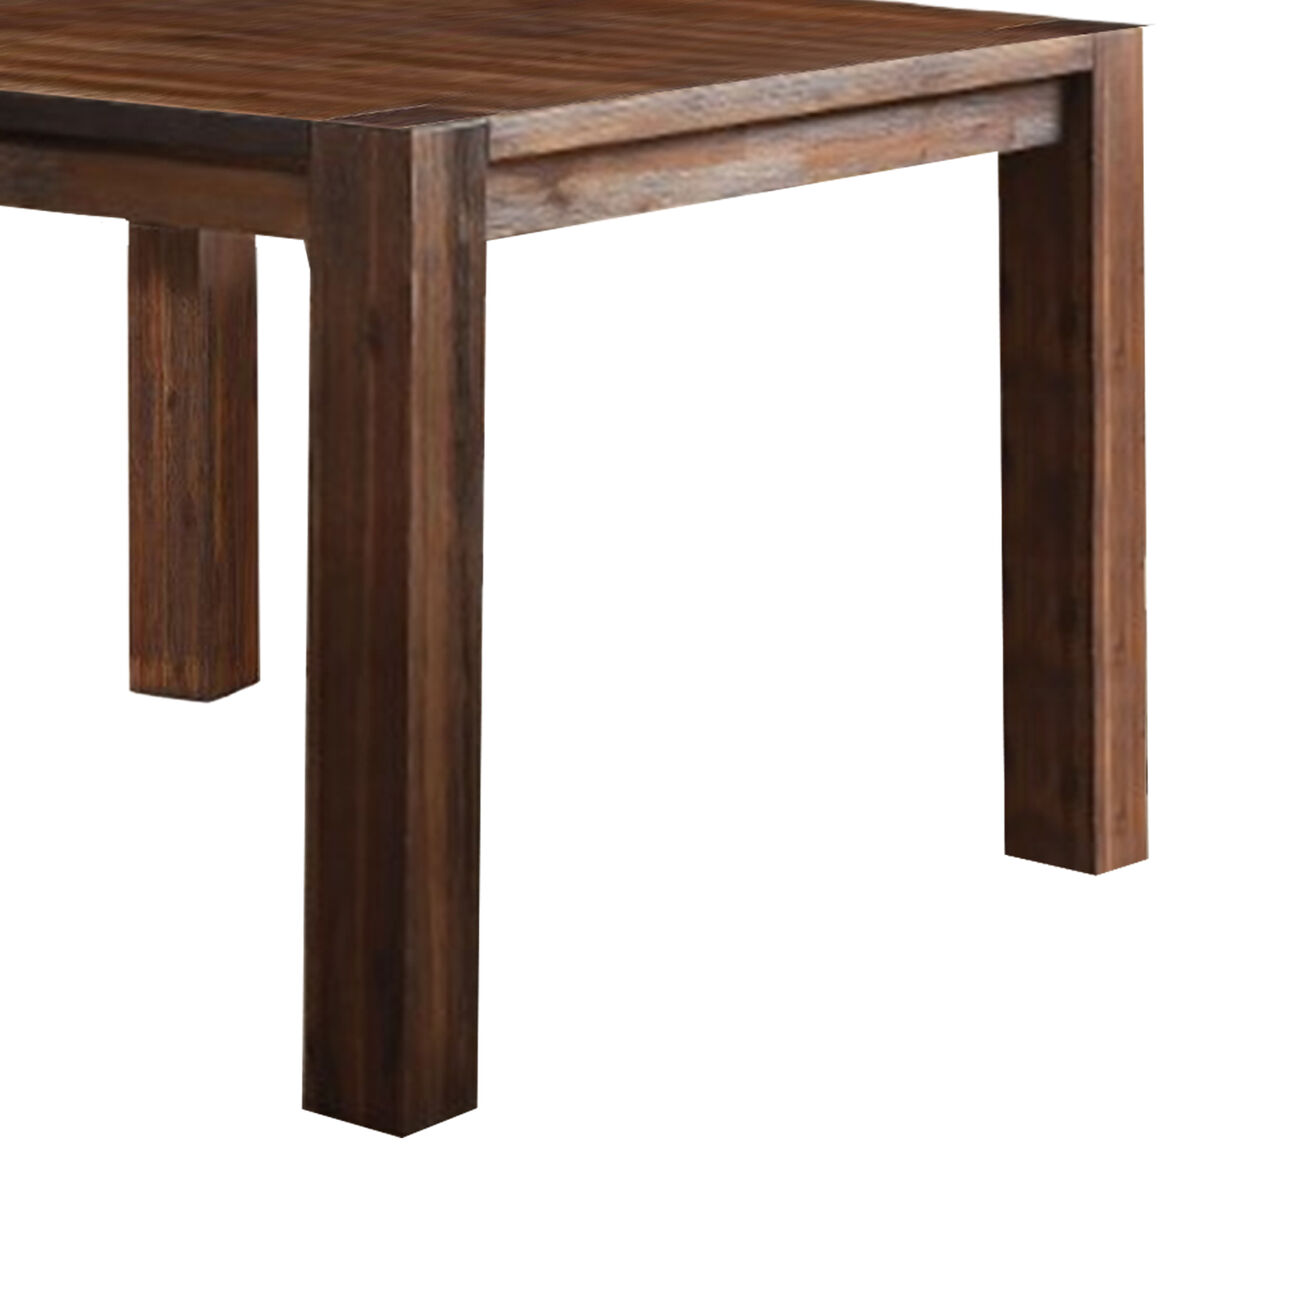 Square Wooden Center Table with Block Legs, Brick Brown